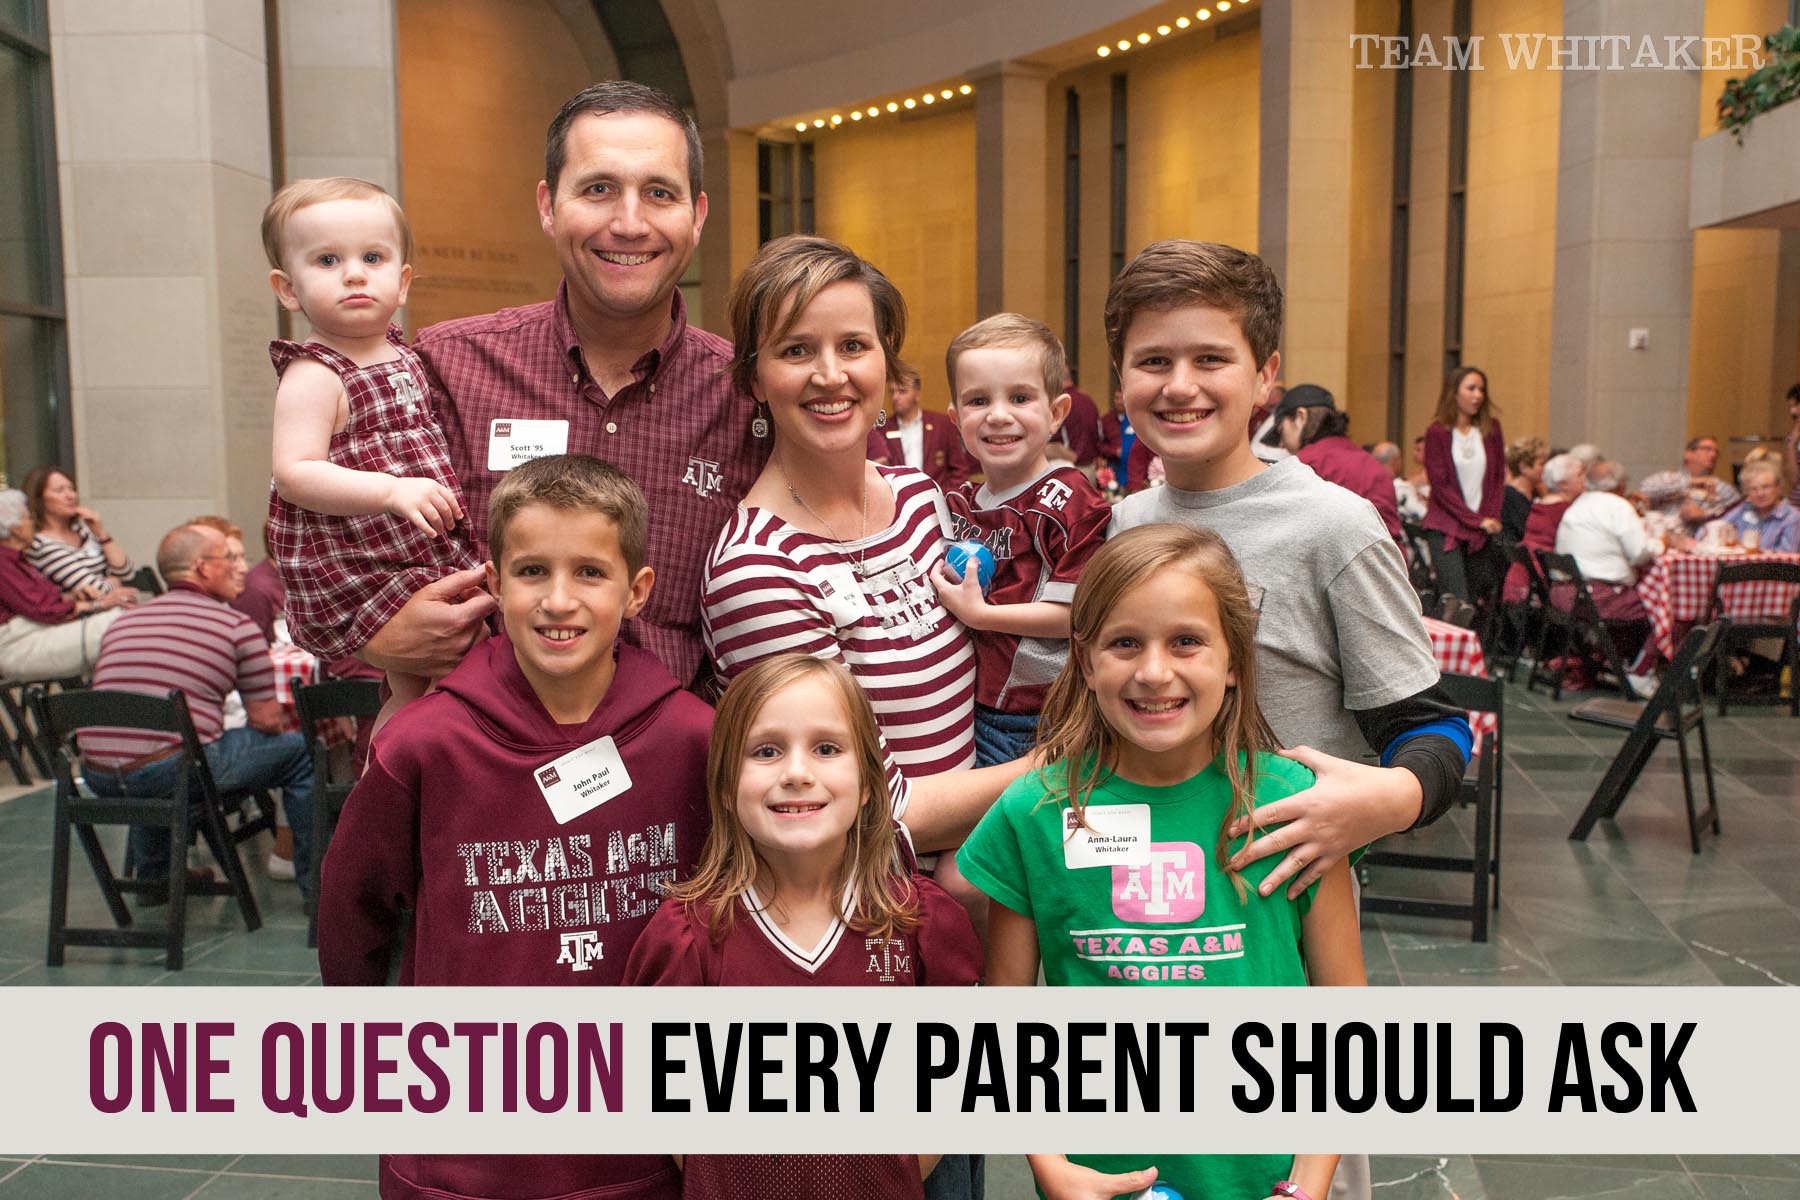 The pressure is fierce. So many things are clamoring for our family's attention. Are you taking time to ask this one, very important, question when it comes to your family and your kids?